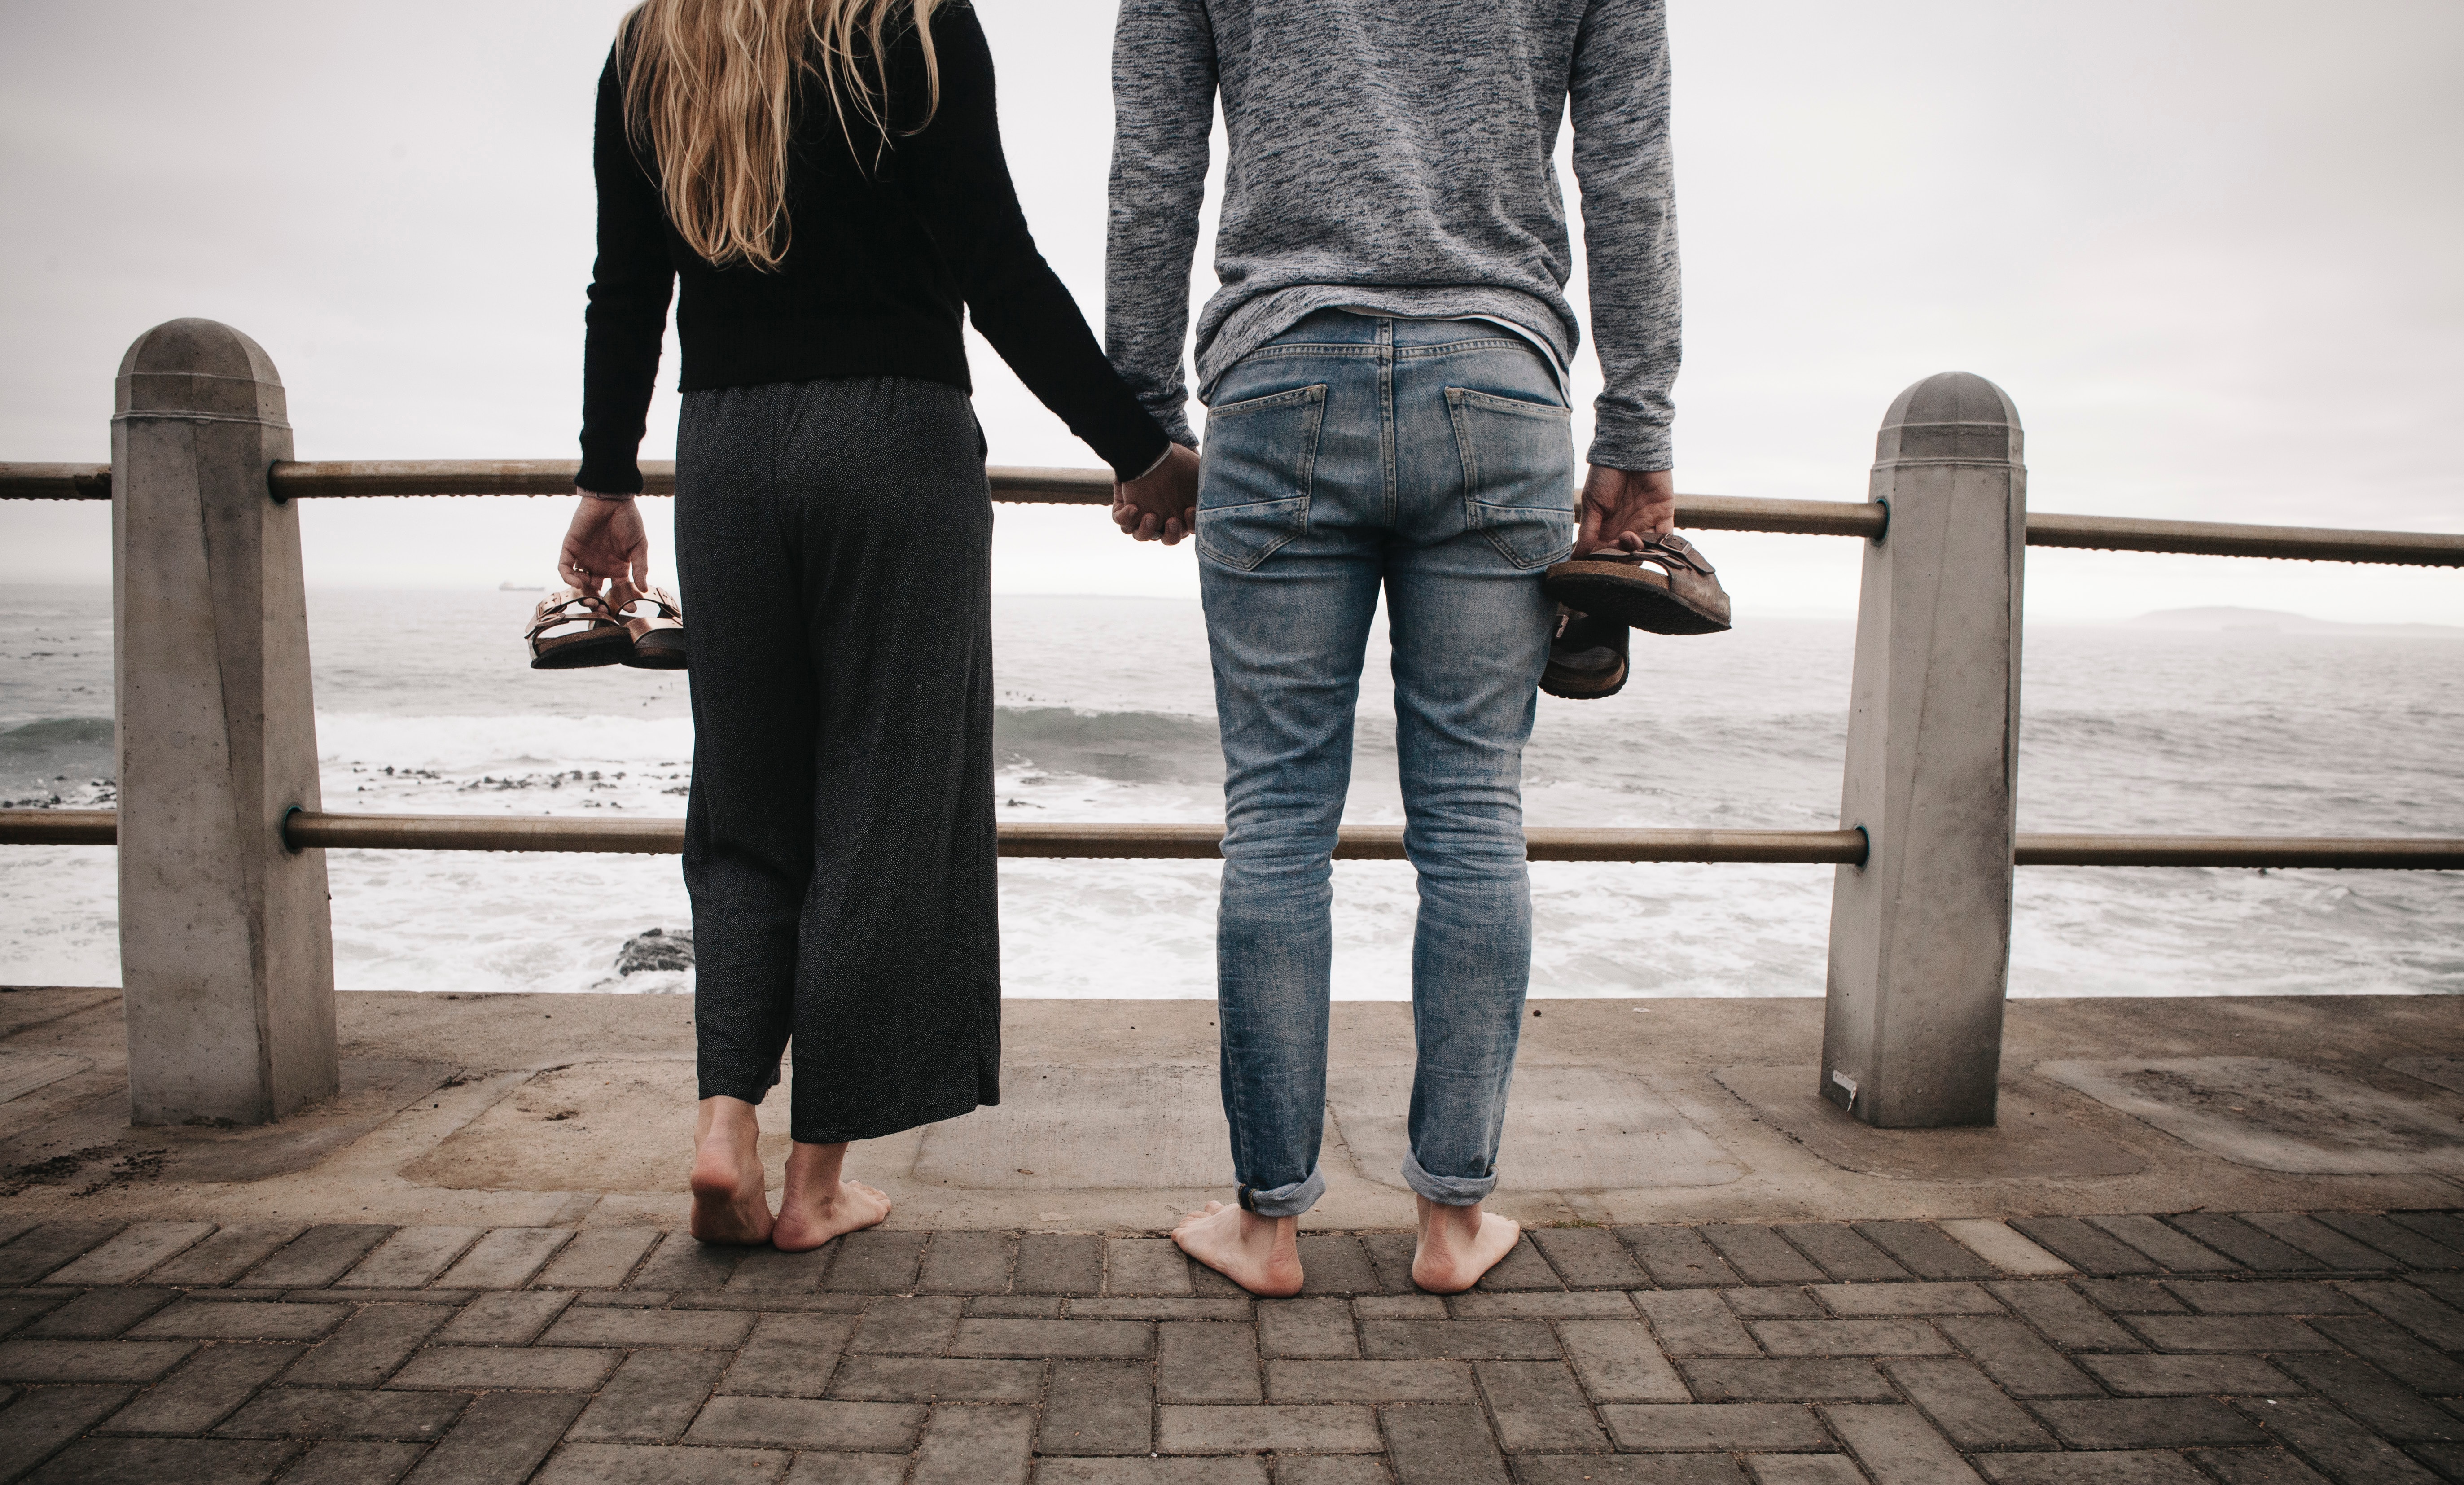 A couple holding hands while looking at the ocean. | Source: Unsplash